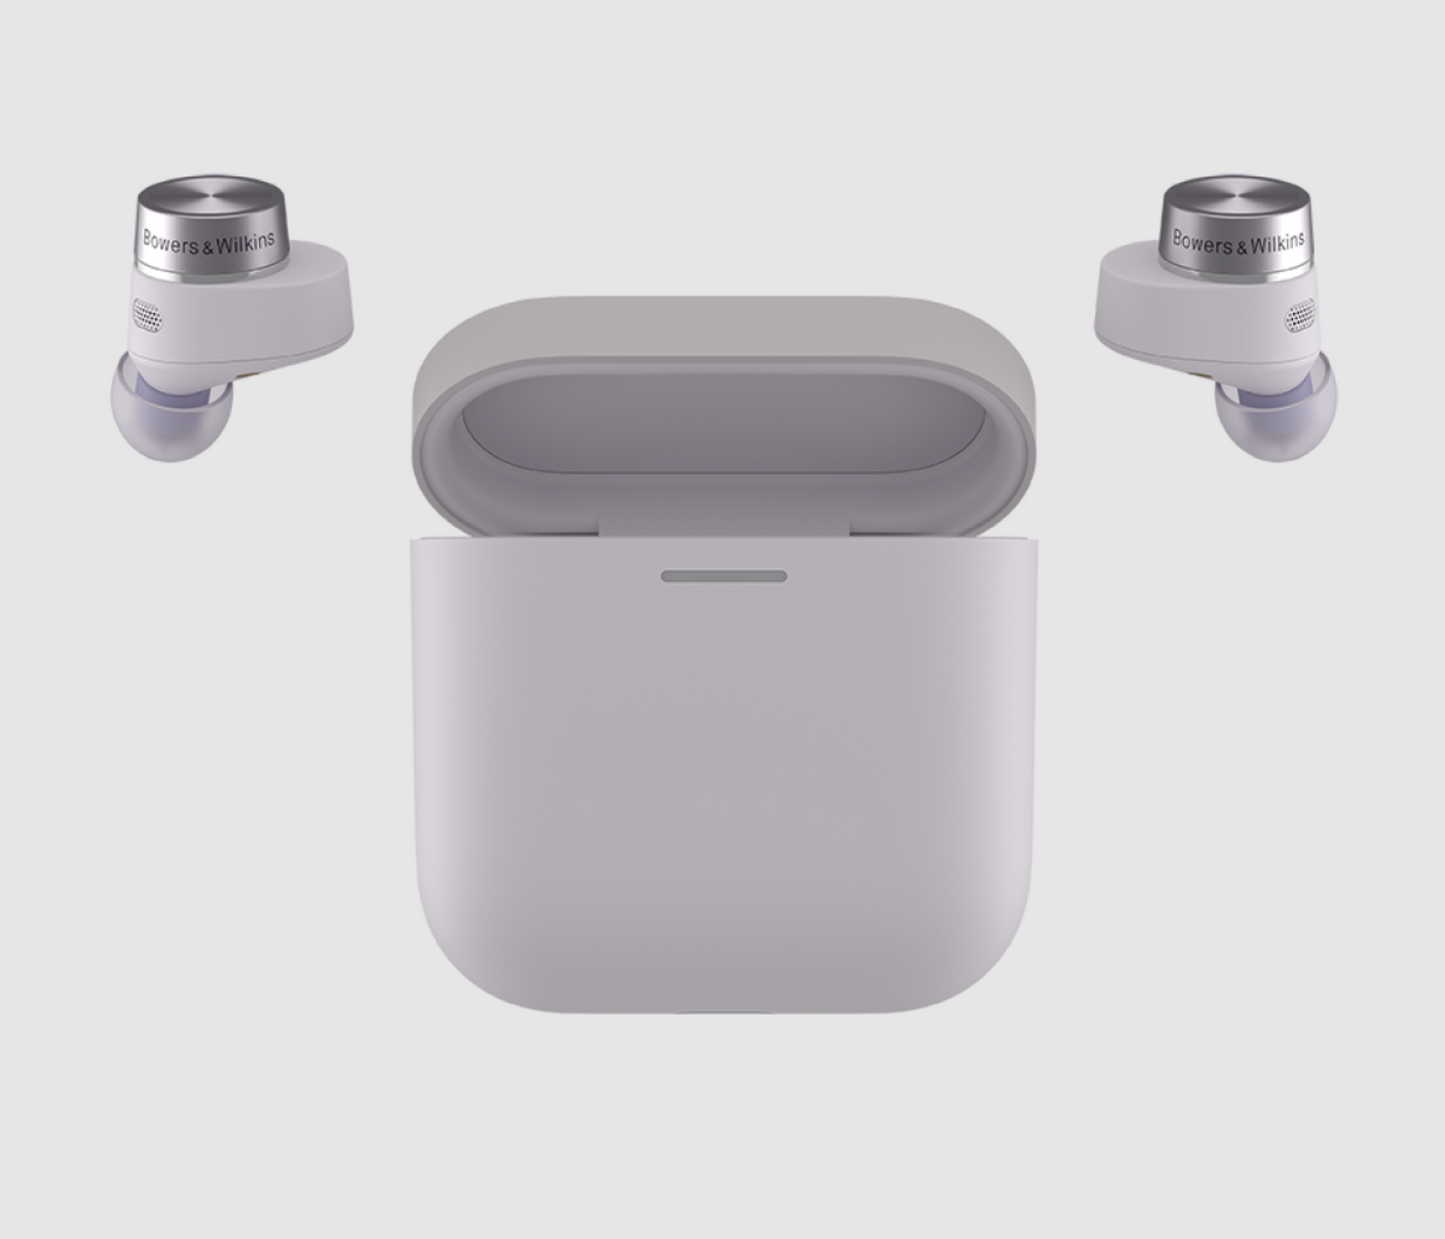 B&W Pi5 S2 Wireless Earbuds in Spring Lilac. Image with case